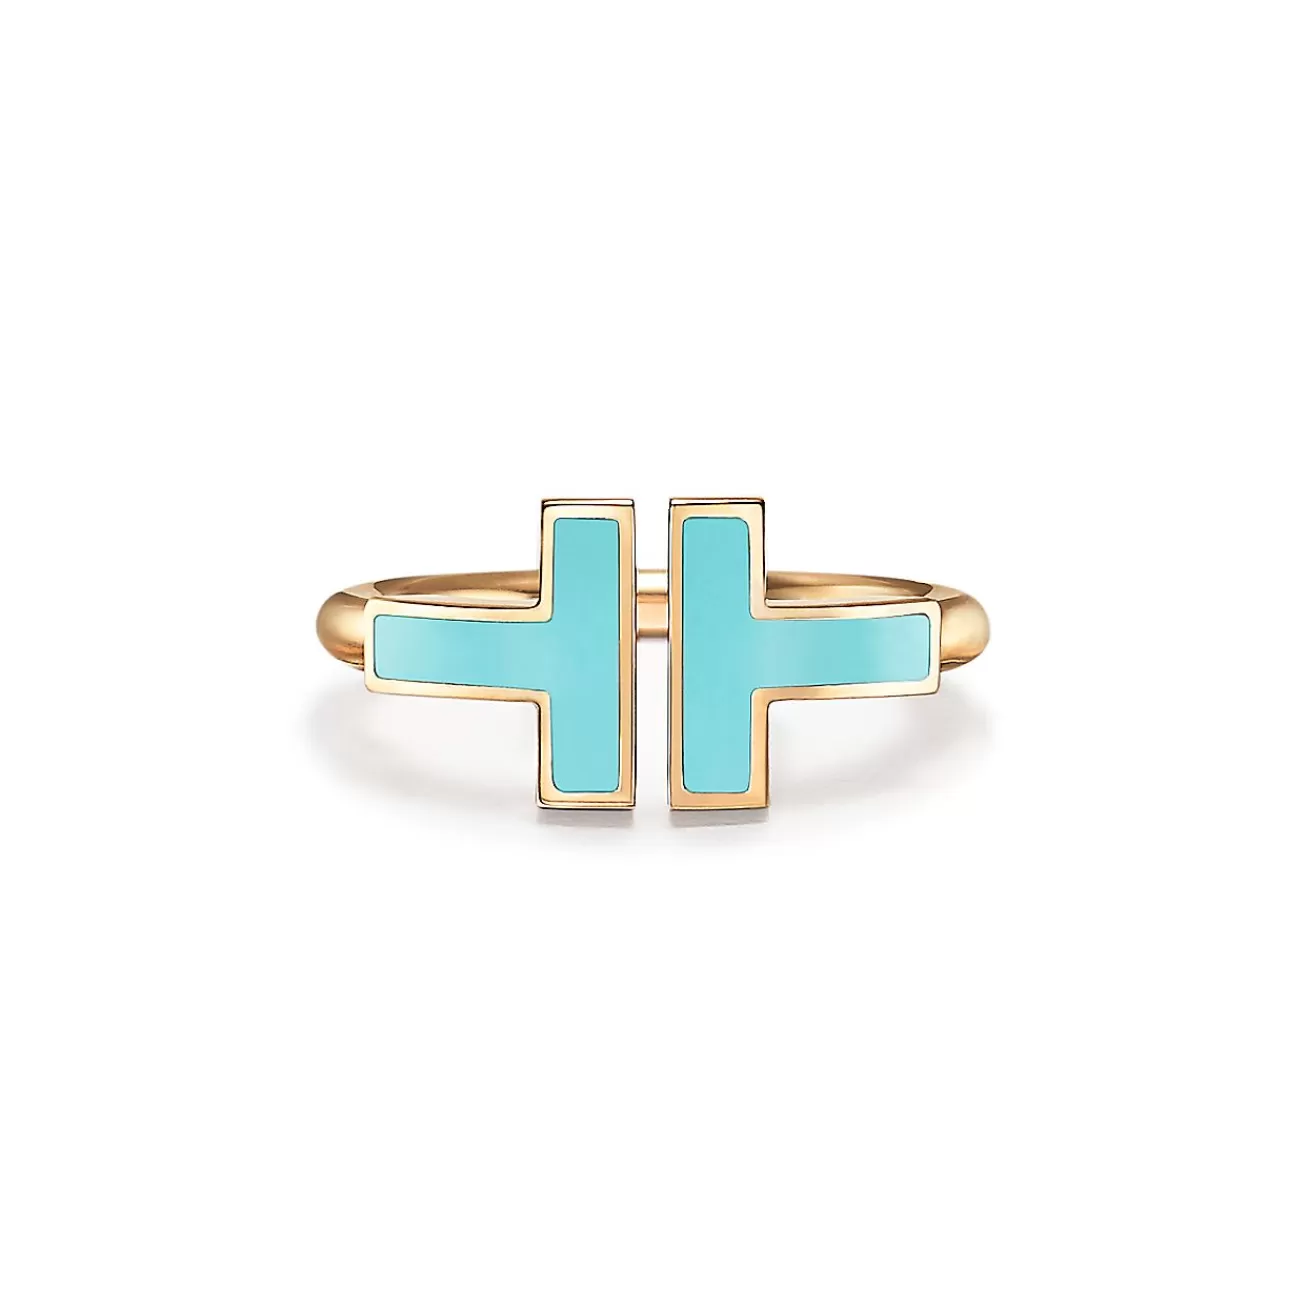 Tiffany & Co. Tiffany T turquoise wire ring in 18k gold. | ^ Rings | Gold Jewelry